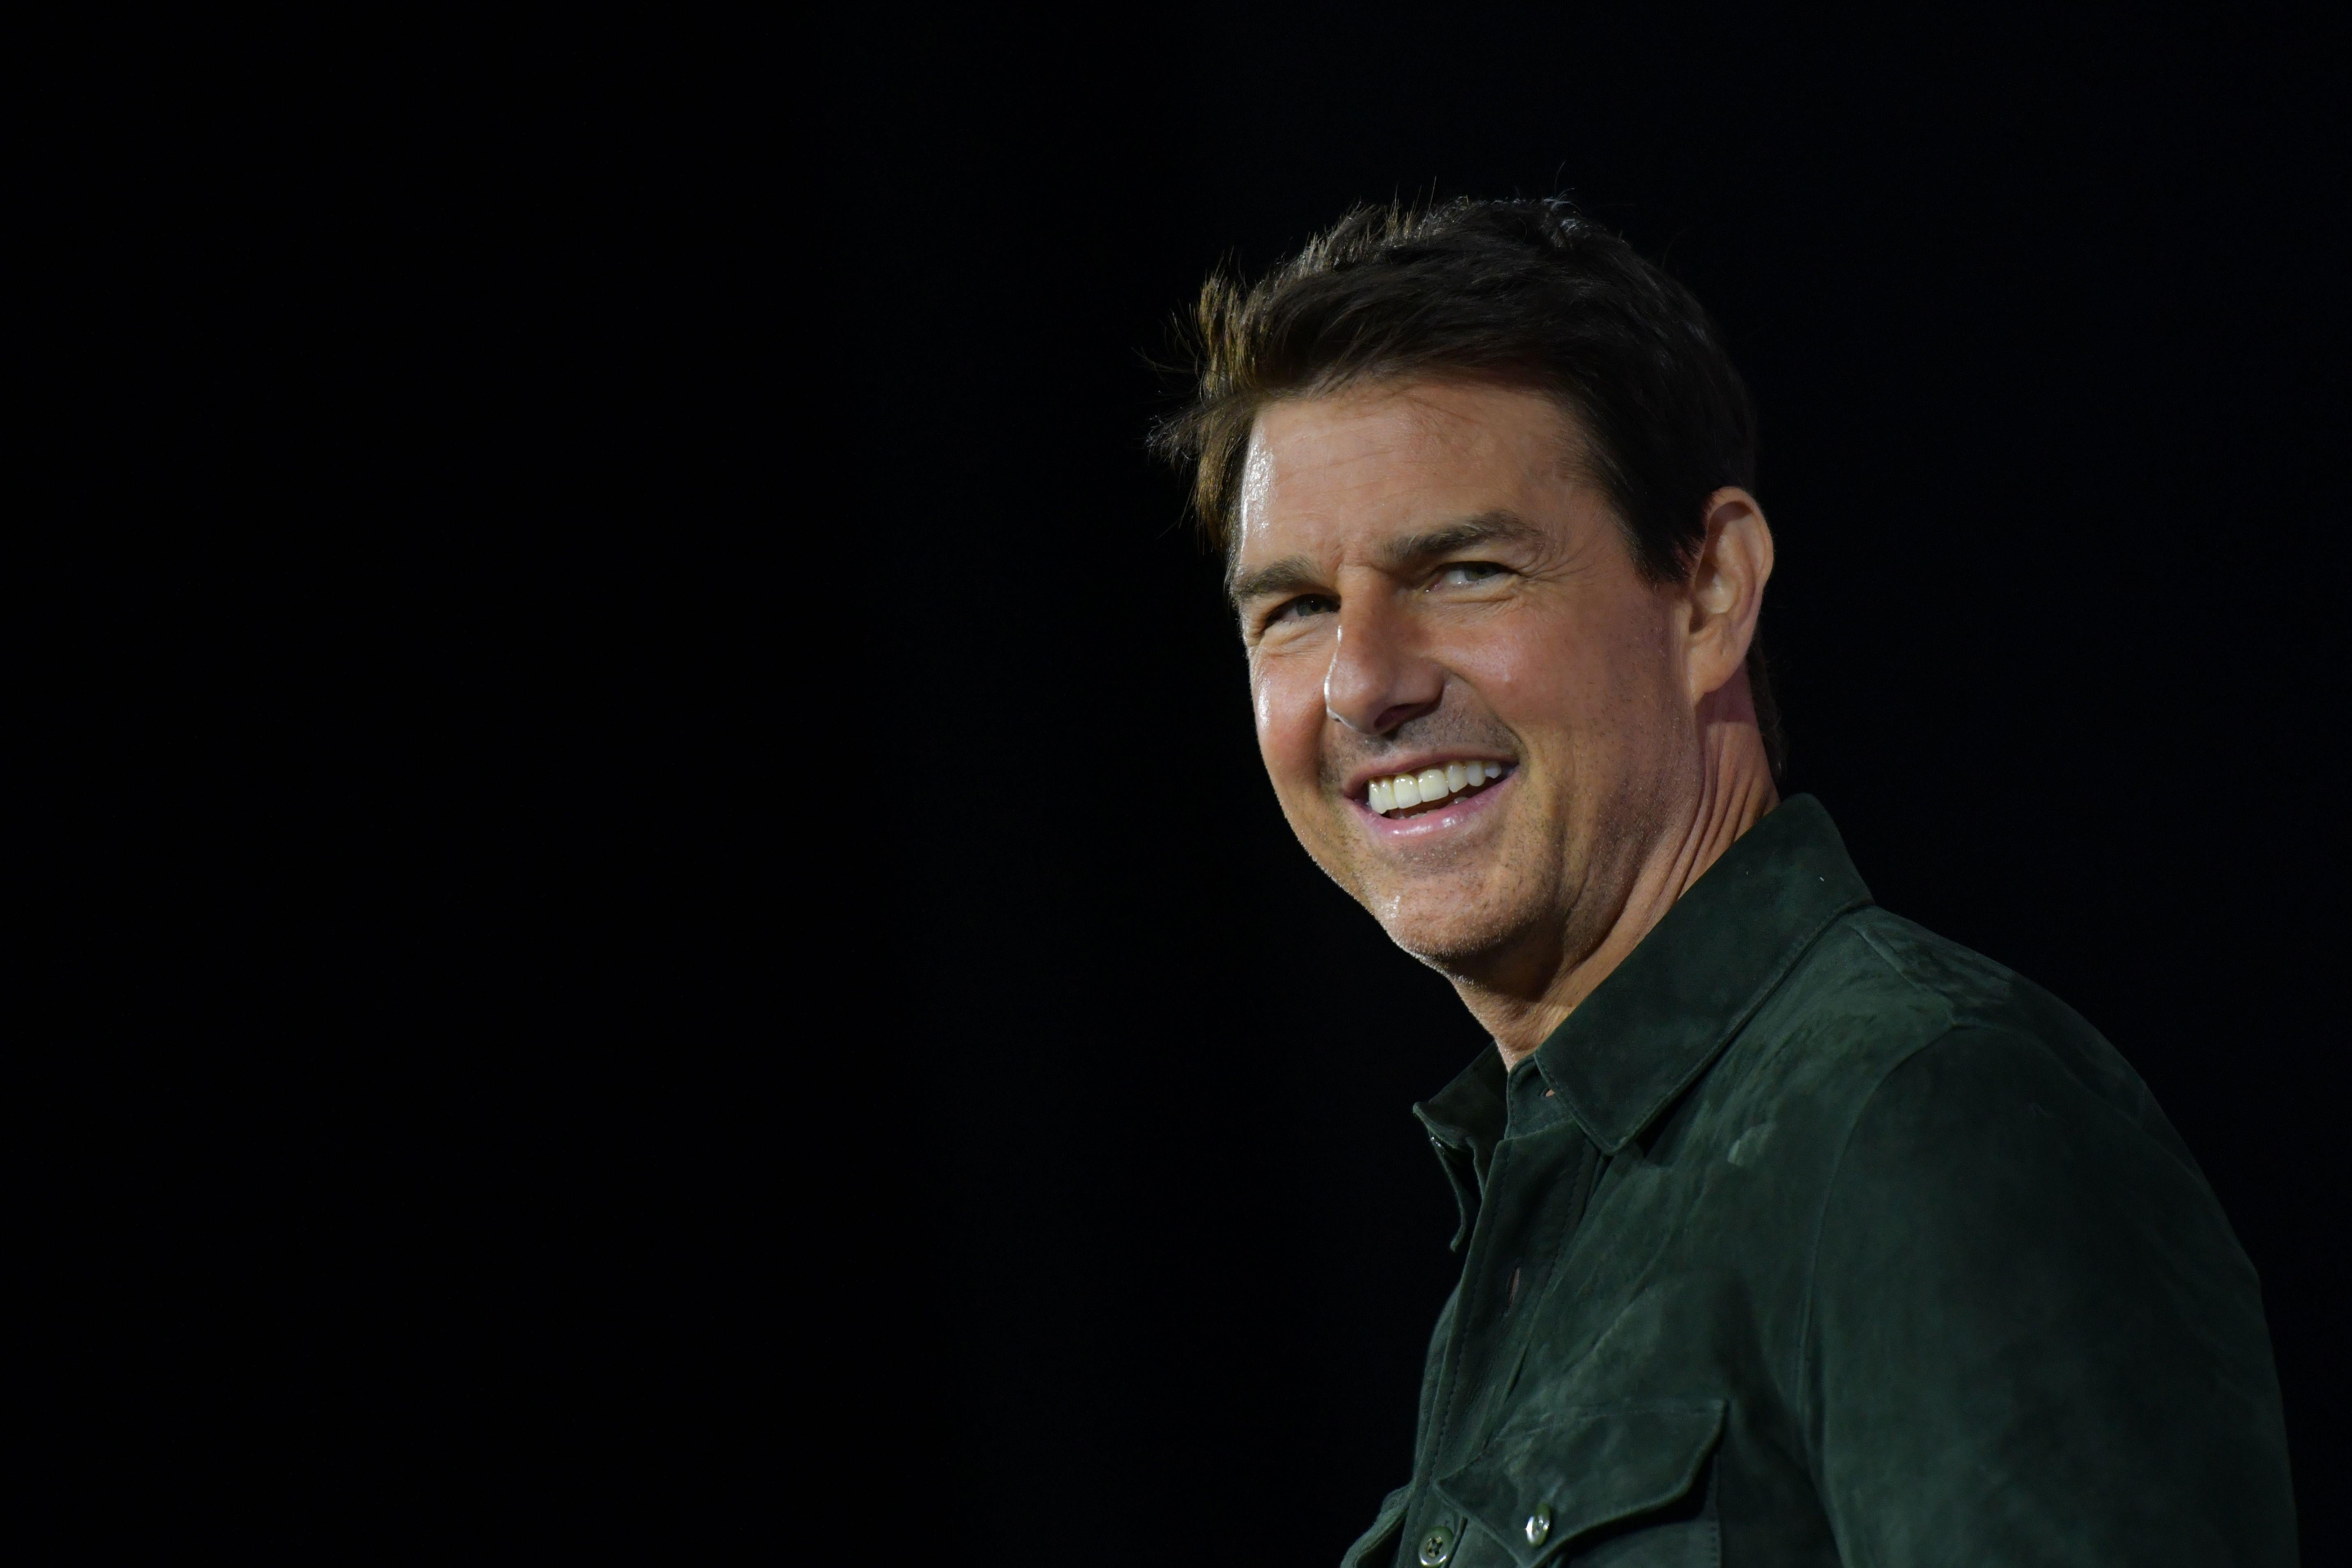 Actor Tom Cruise makes a surprise appearance in Hall H to promote Top Gun: Maverick  at the Convention Center during Comic Con in San Diego, California on July 18, 2019. (Photo by Chris Delmas / AFP)        (Photo credit should read CHRIS DELMAS/AFP/Getty Images)